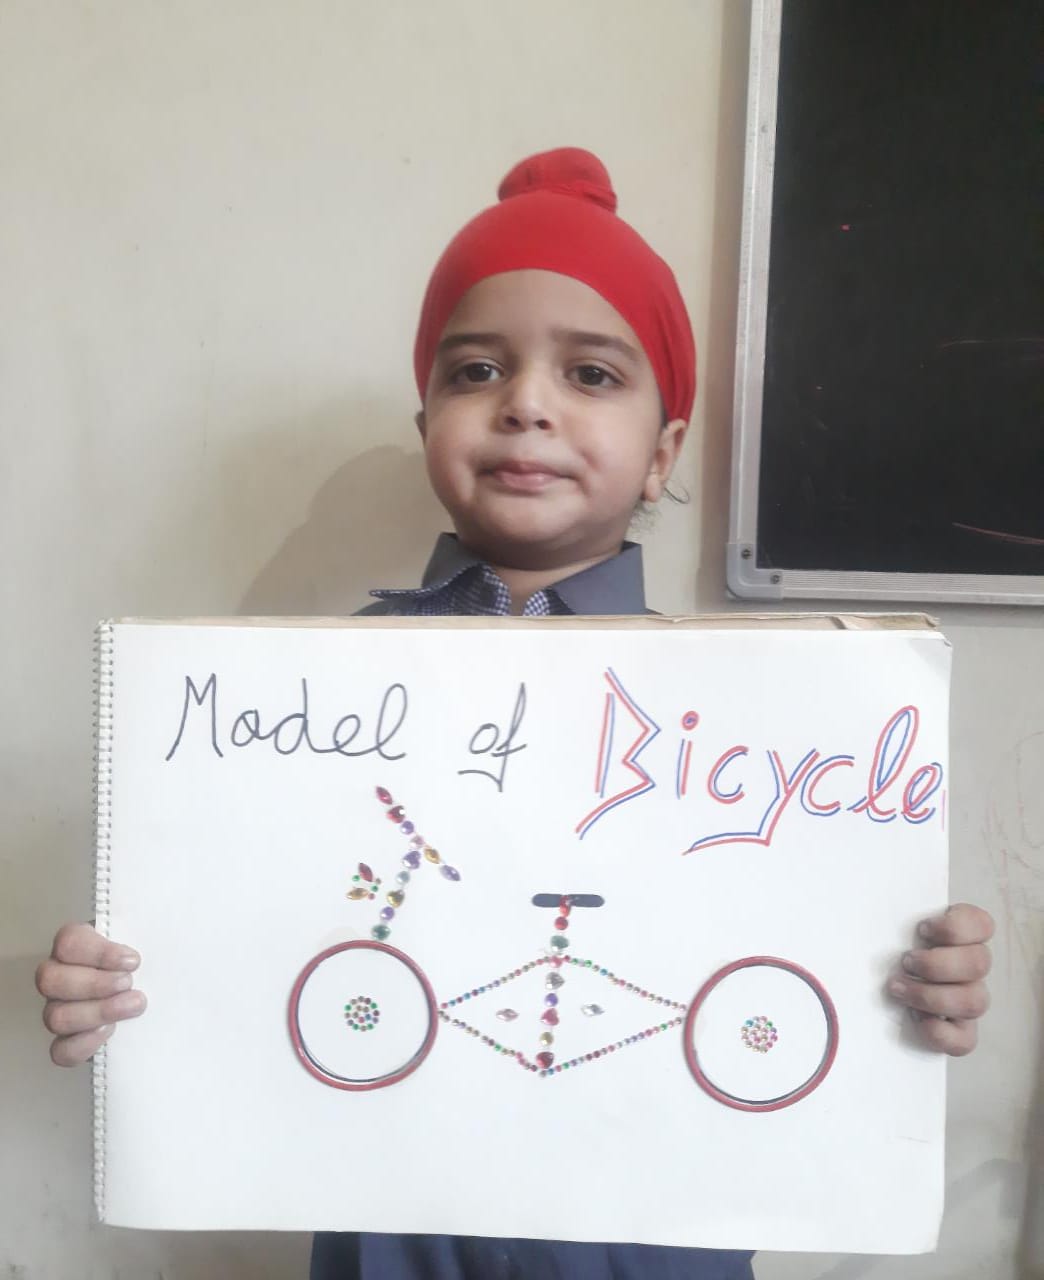 WORLD BICYCLE DAY